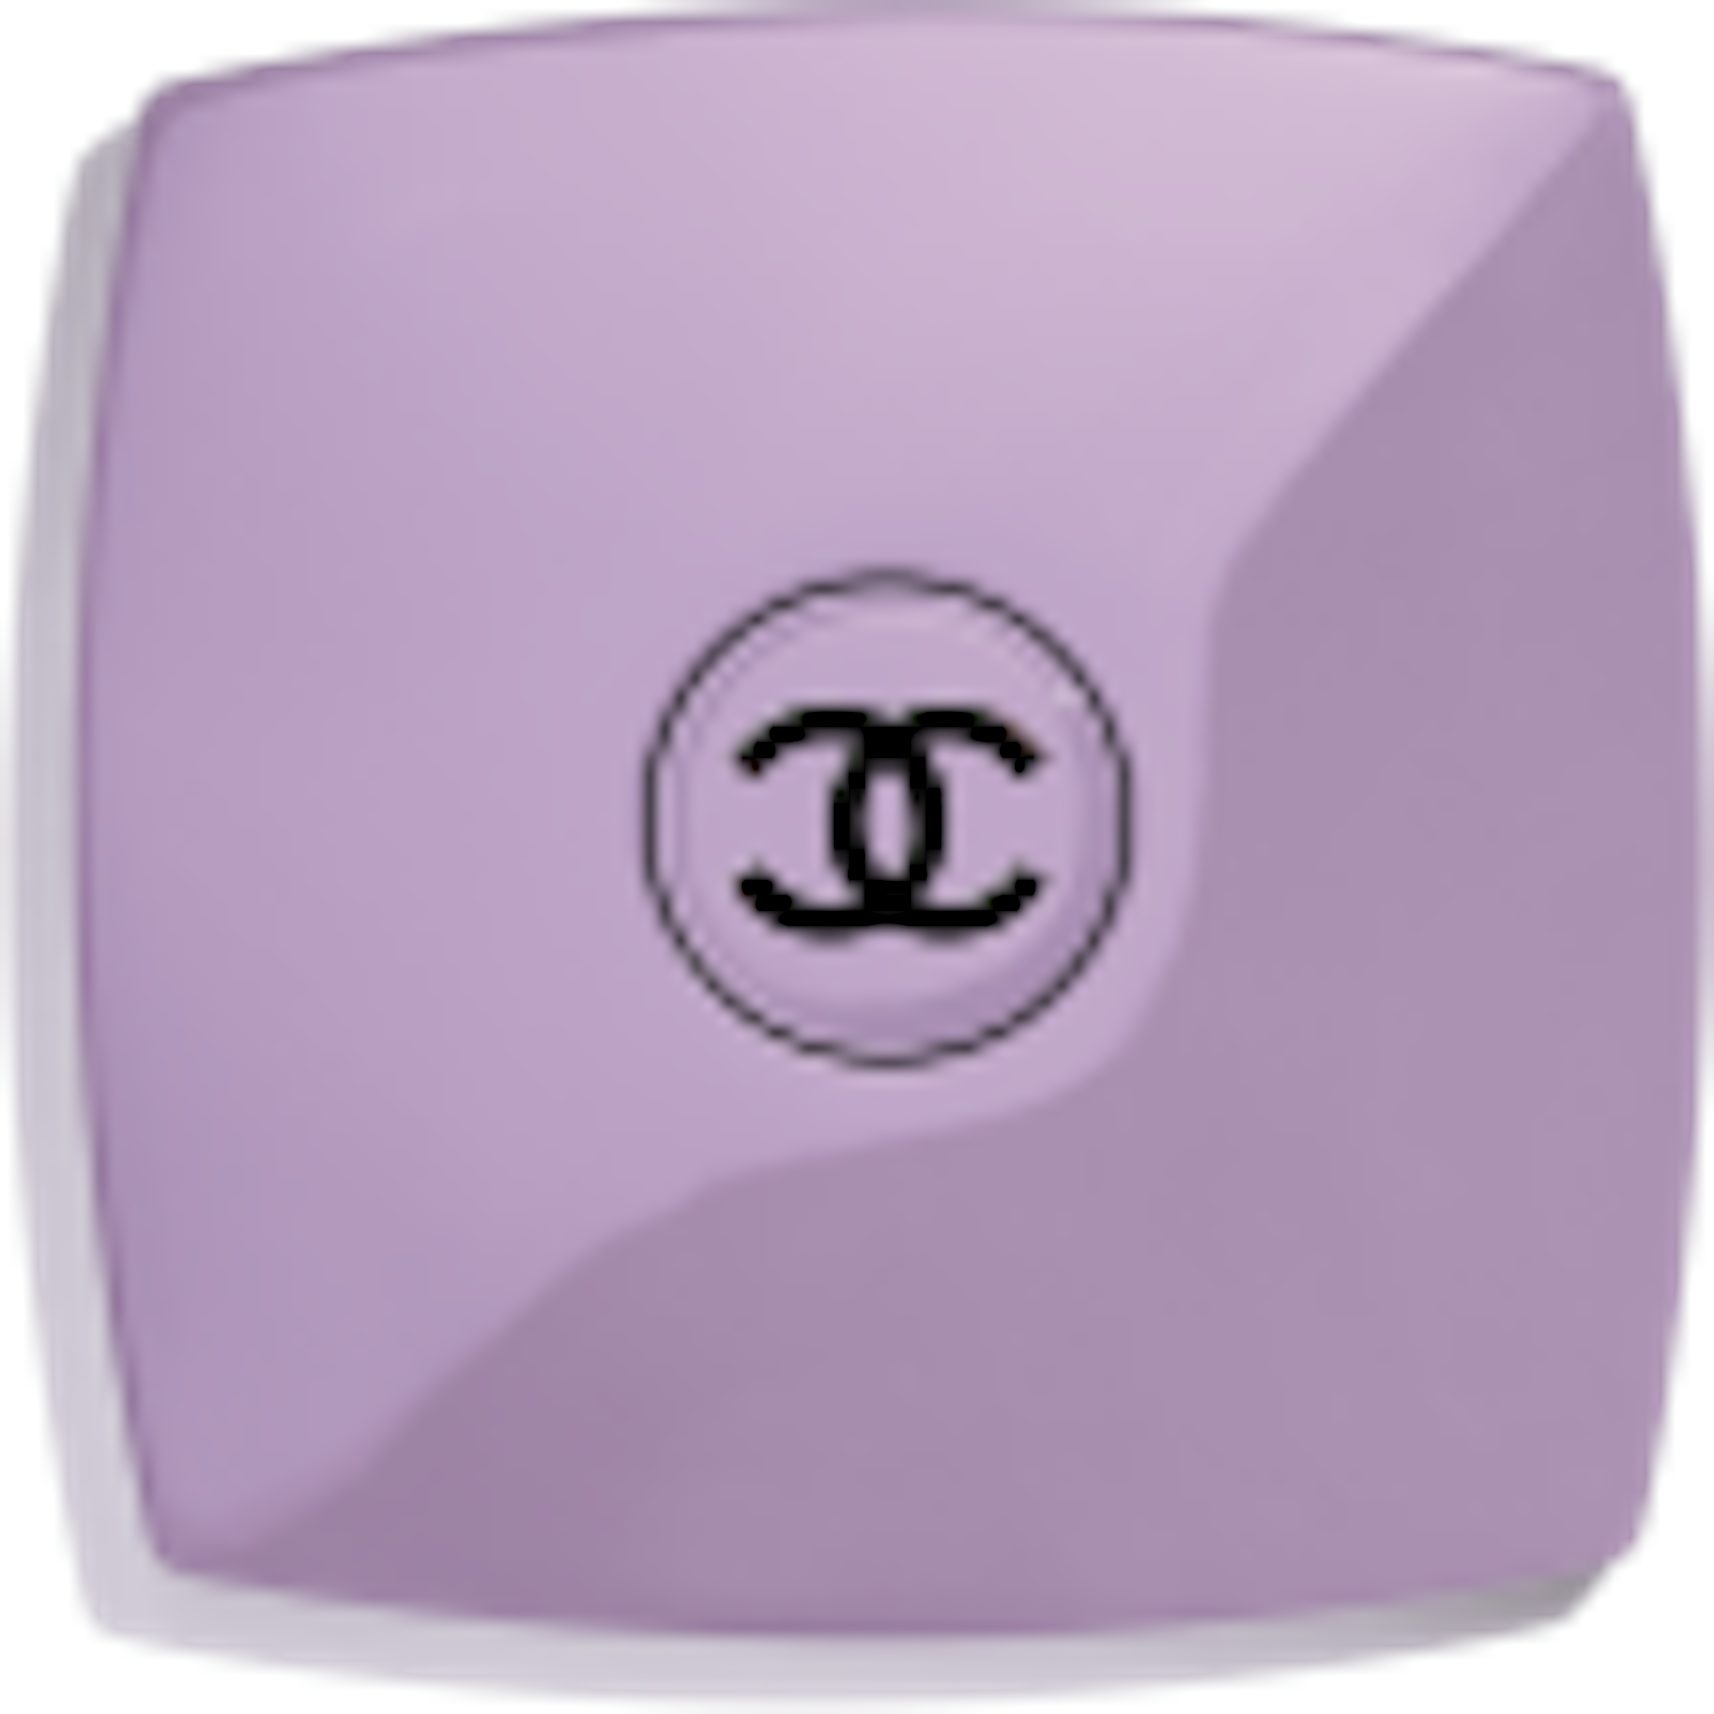 CHANEL DIVA Mirror Duo CODES COULEUR Limited Edition Collection